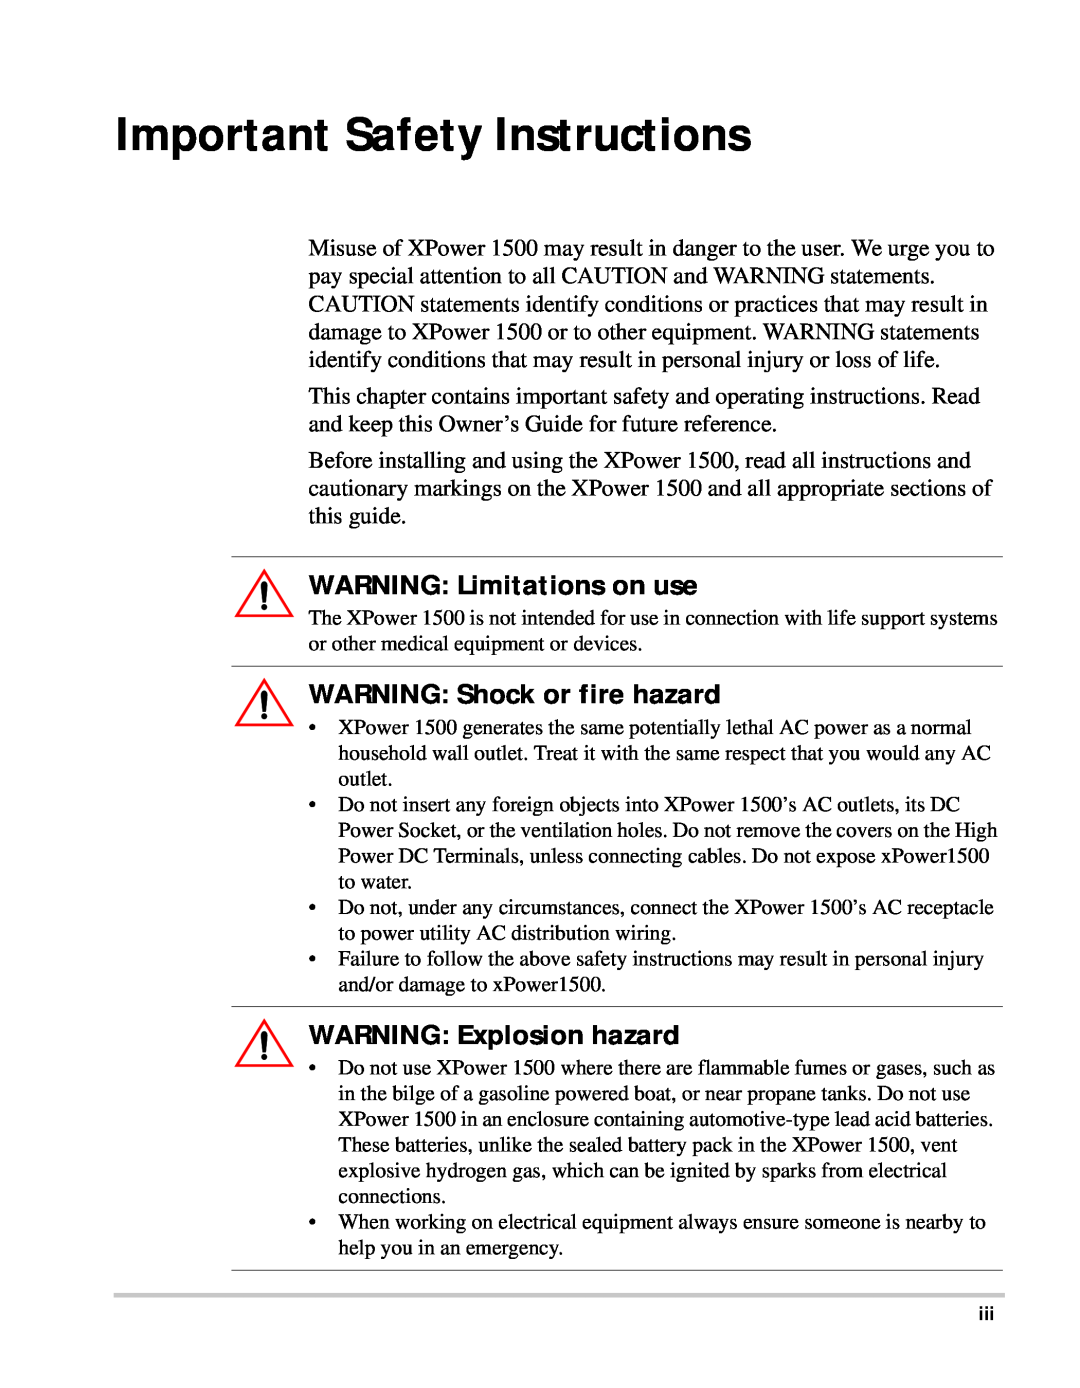 Xantrex Technology 1500 manual Important Safety Instructions, WARNING Limitations on use, WARNING Shock or fire hazard 